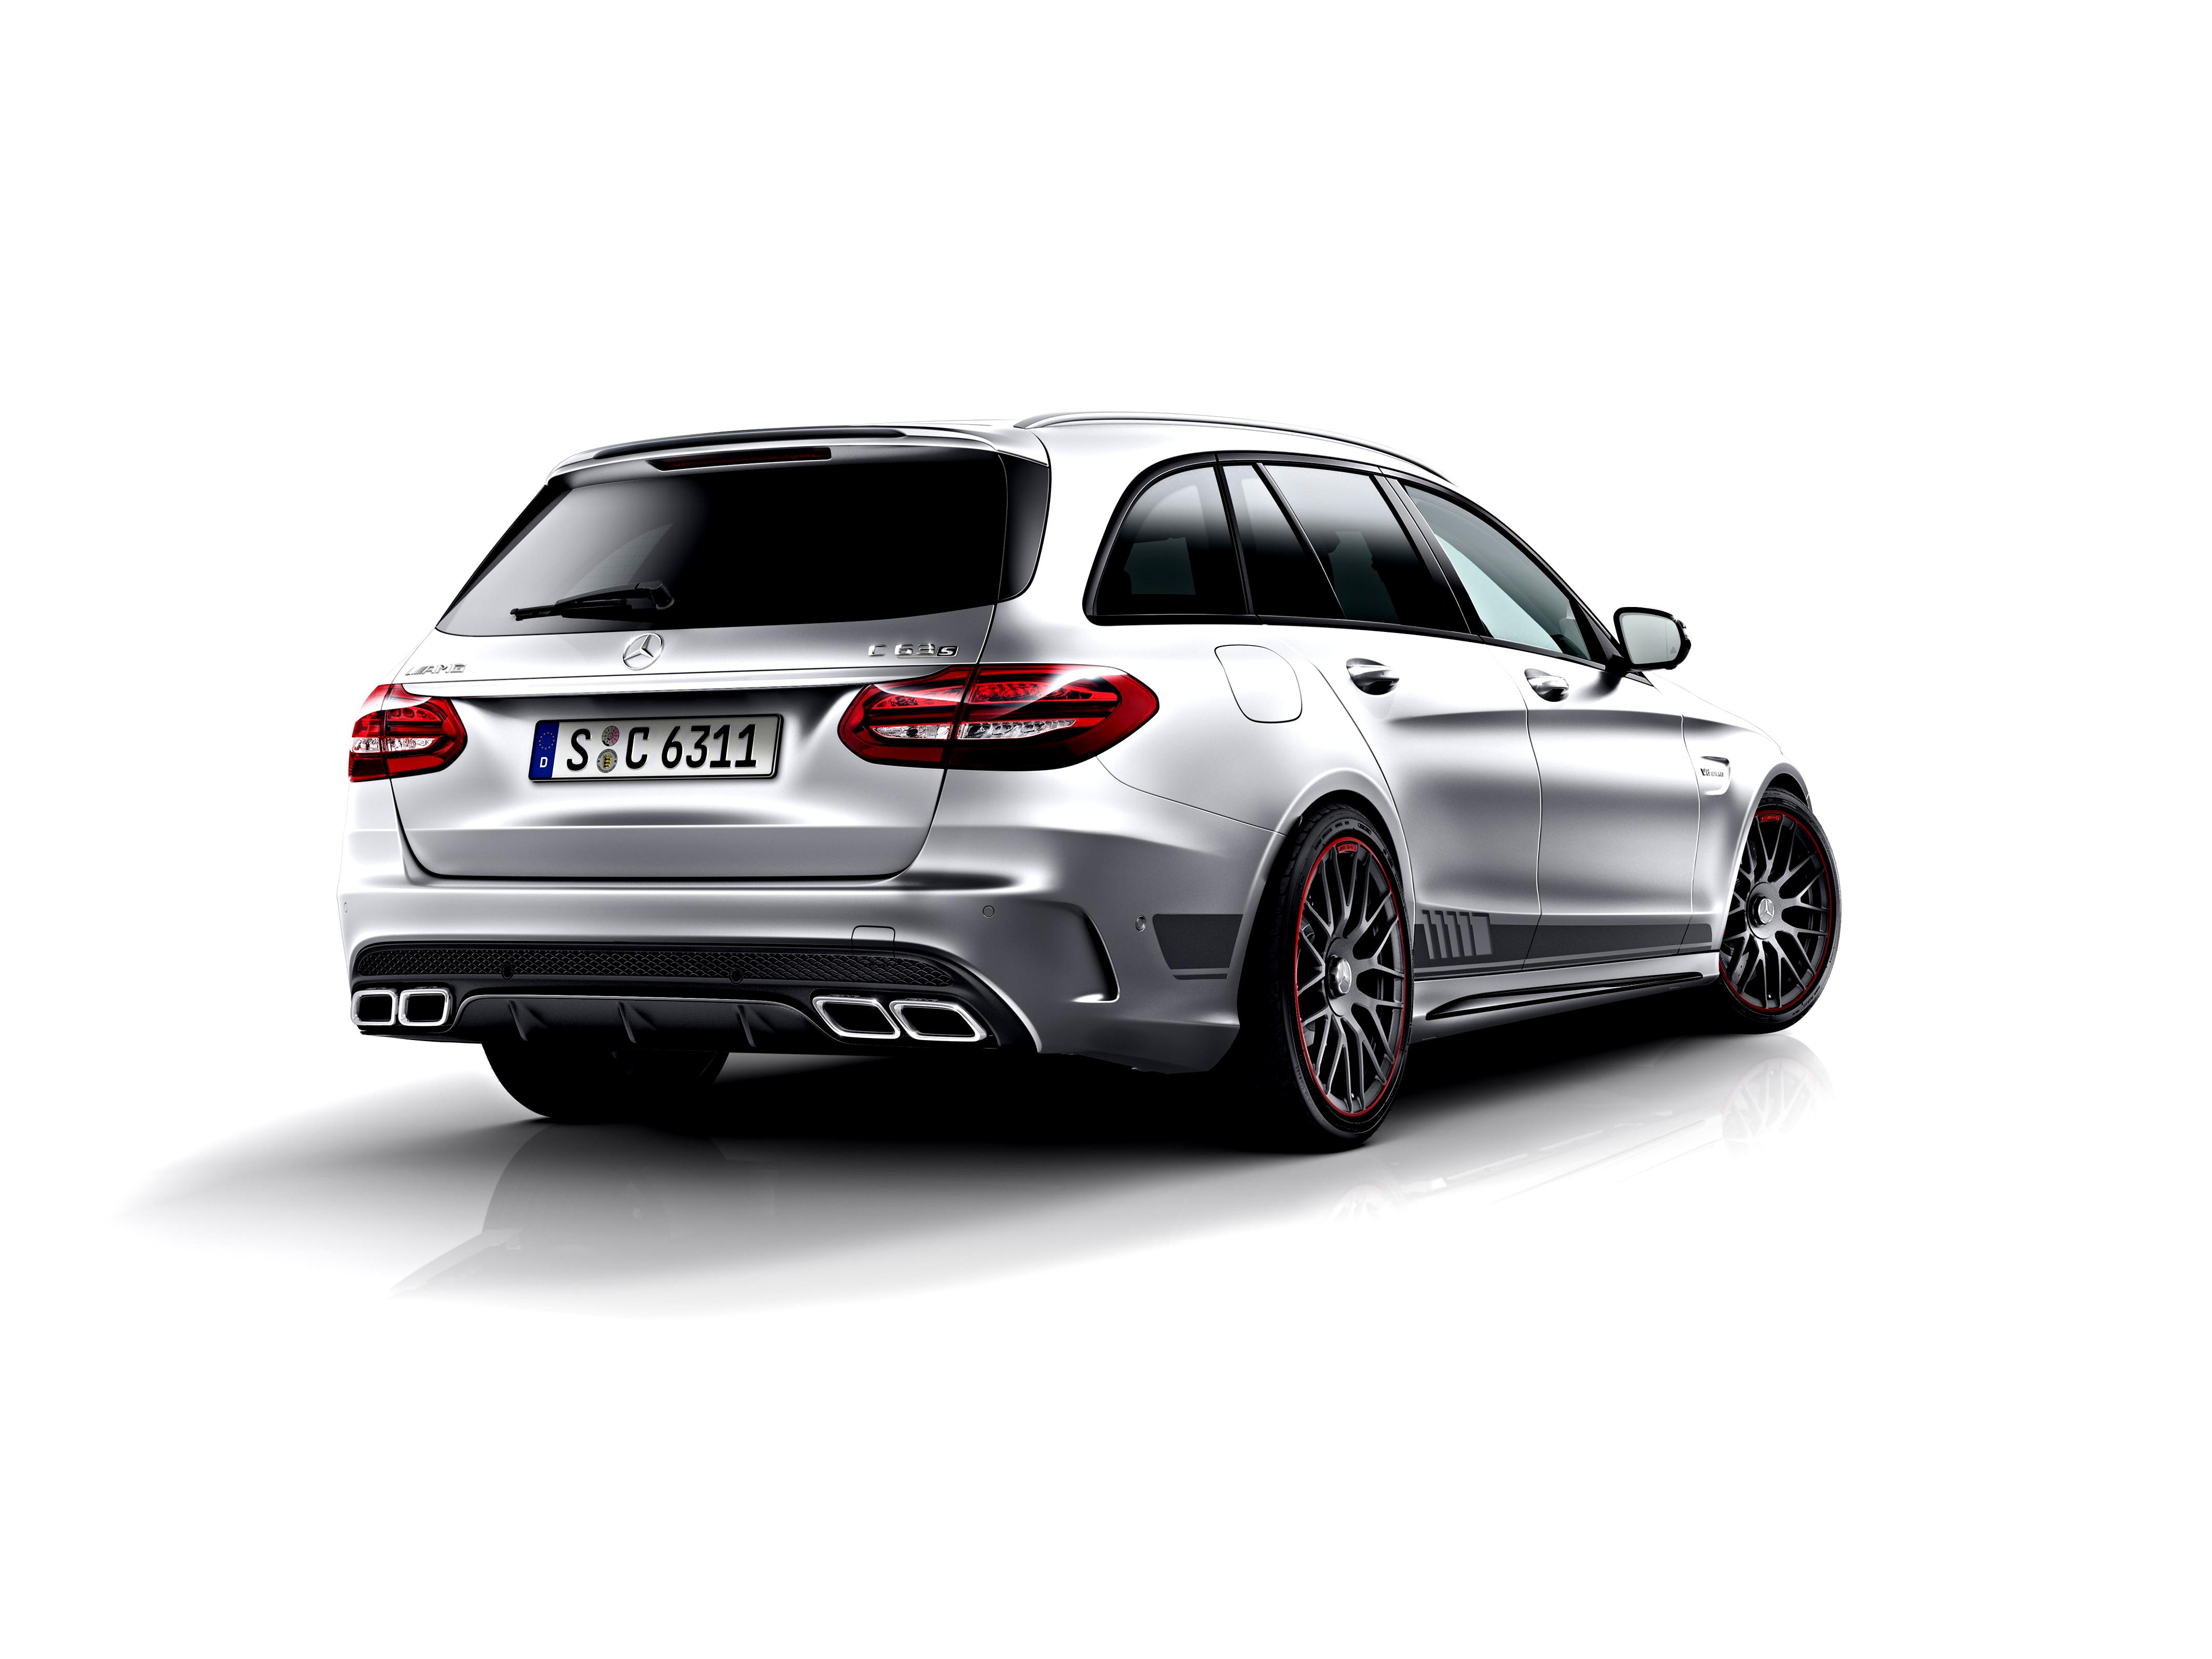 Mercedes Benz C 63 AMG T-Modell S205 2014 #43